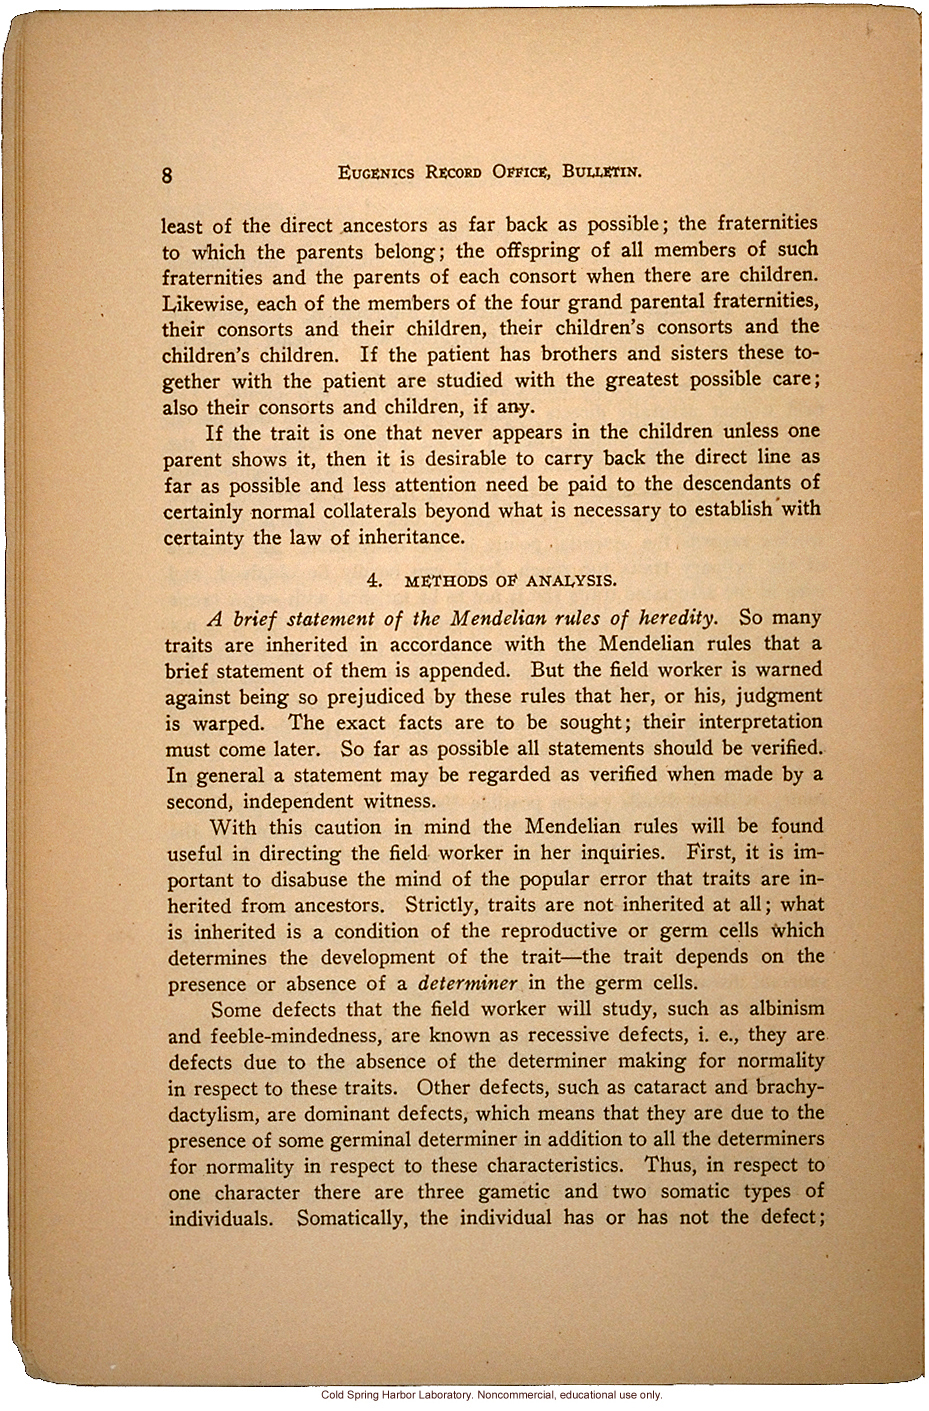 &quote;The Study of Human Heredity,&quote; by Davenport, Laughlin, Weeks, Johnstone, and Goddard, Eugenics Record Office Bulletin No. 2